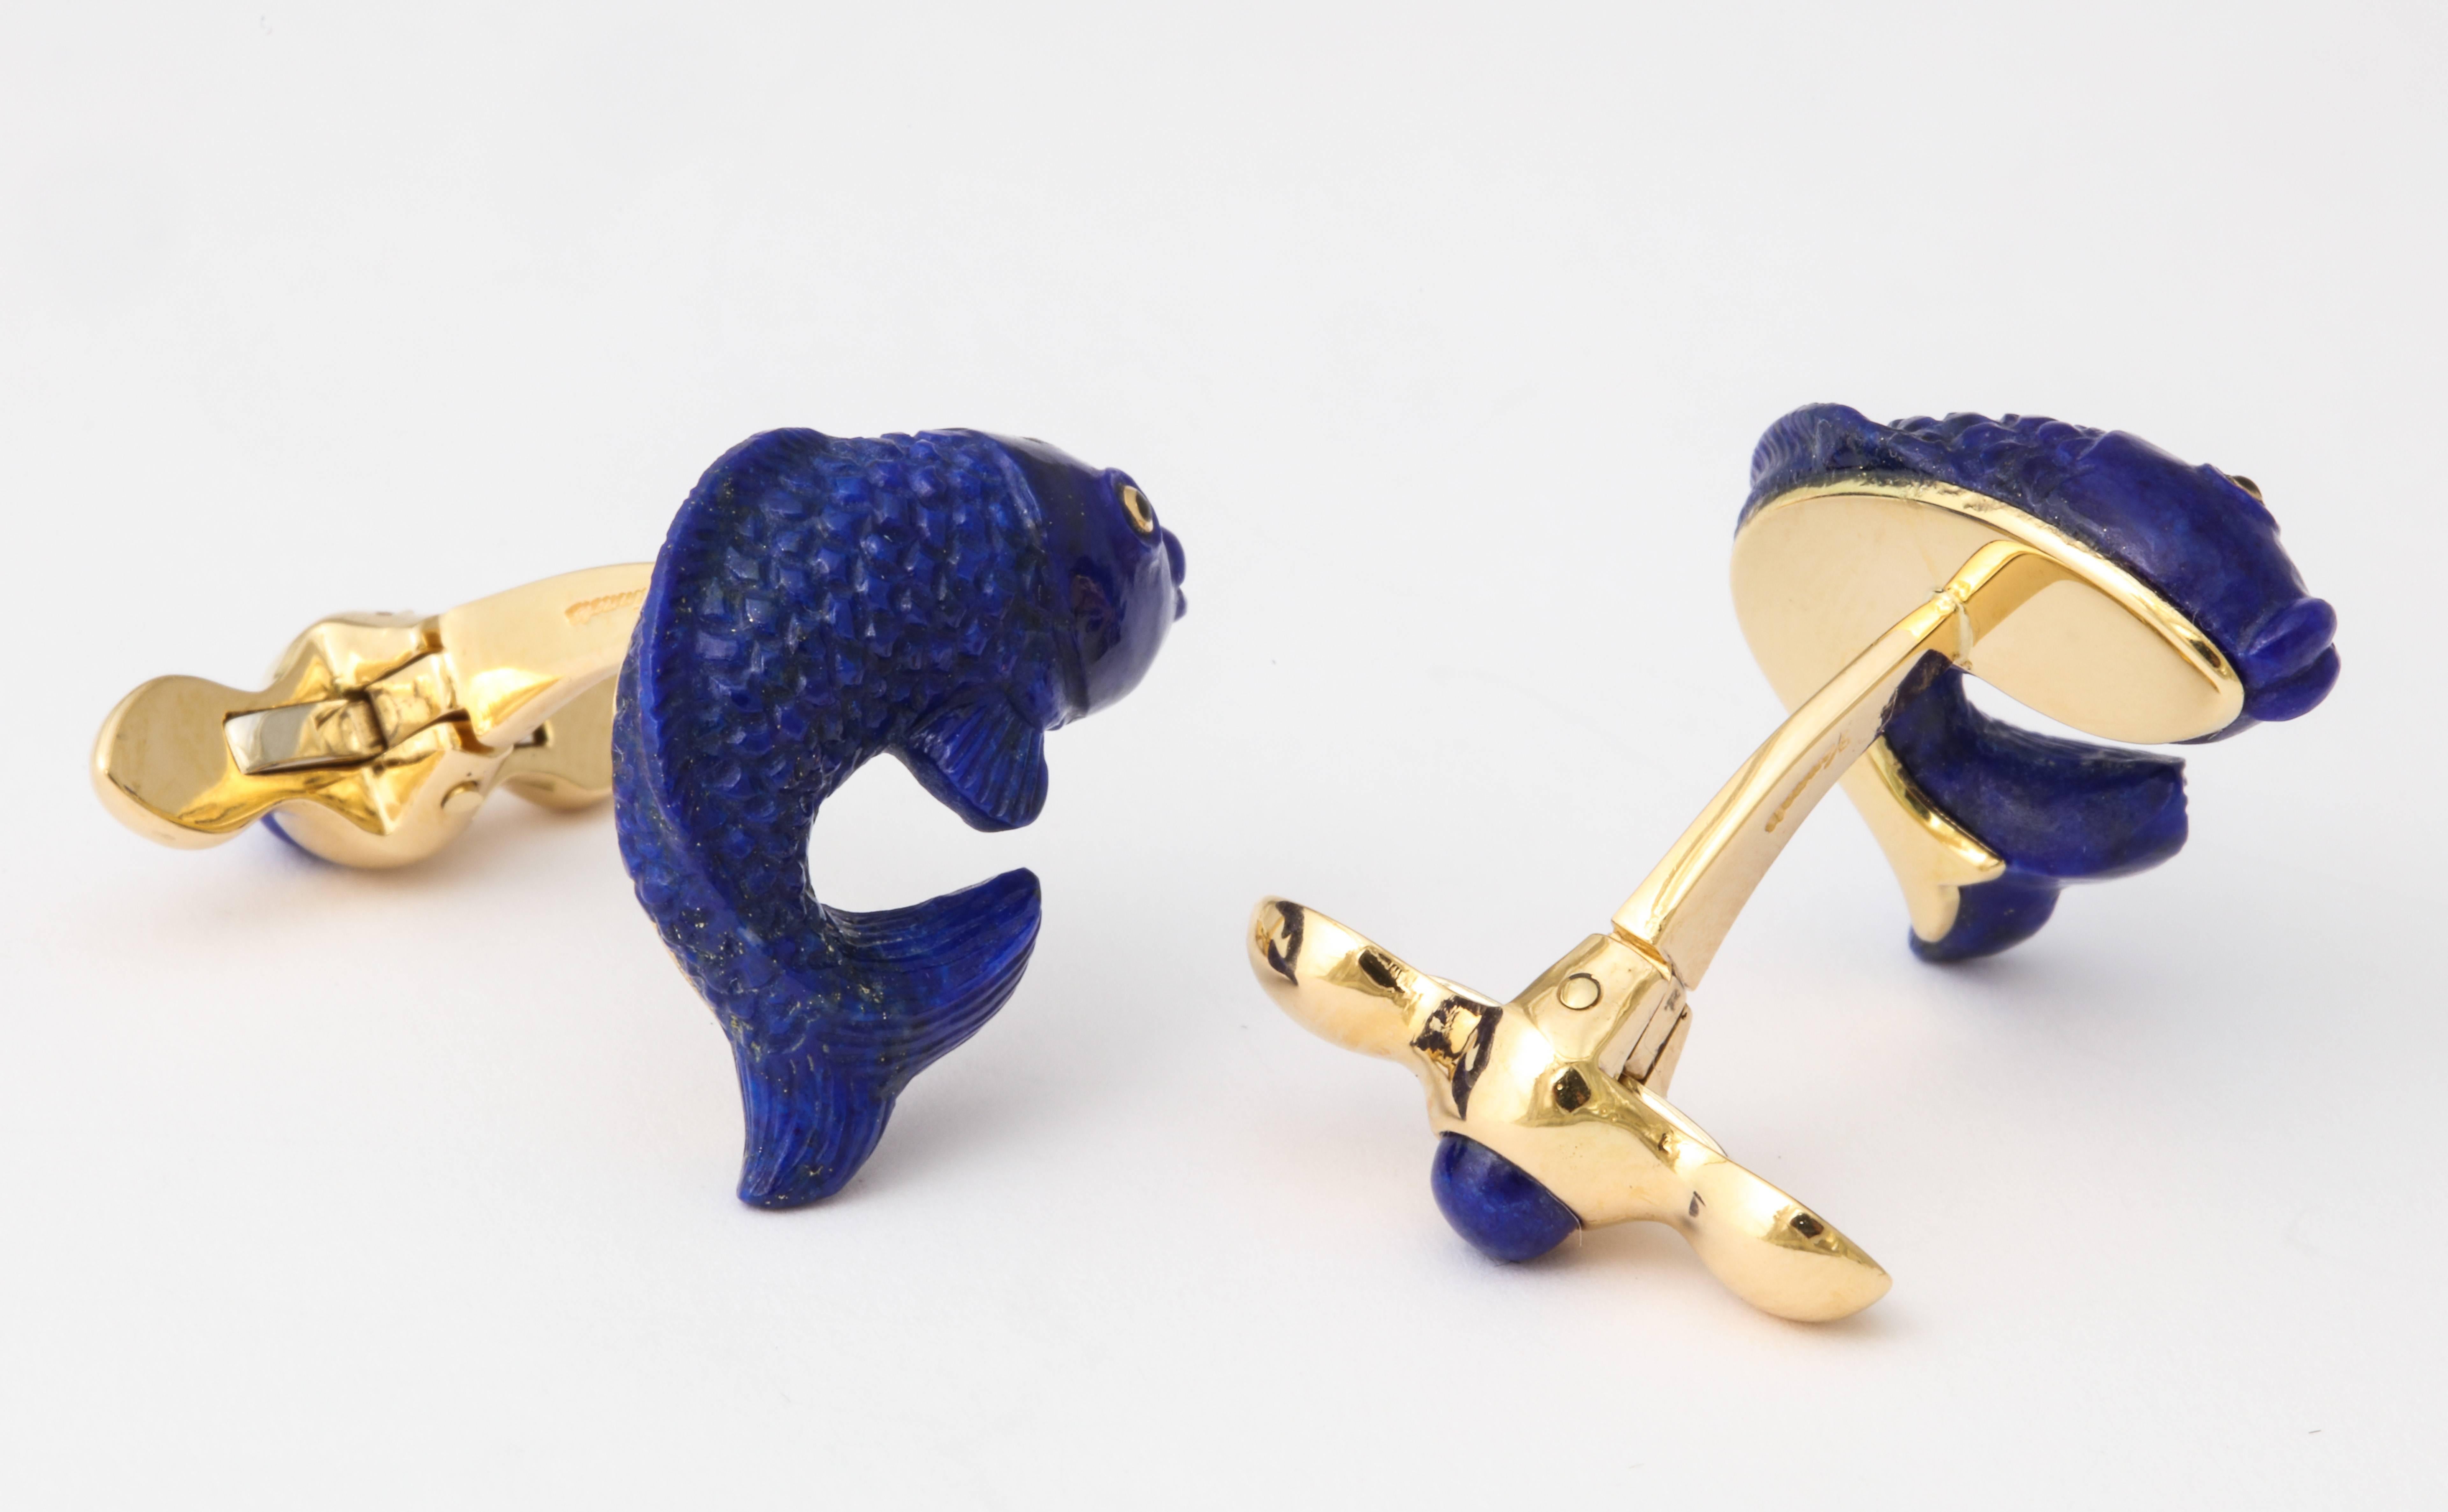 Cabochon Michael Kanners Carved Lapis and Gold Fish Cufflinks